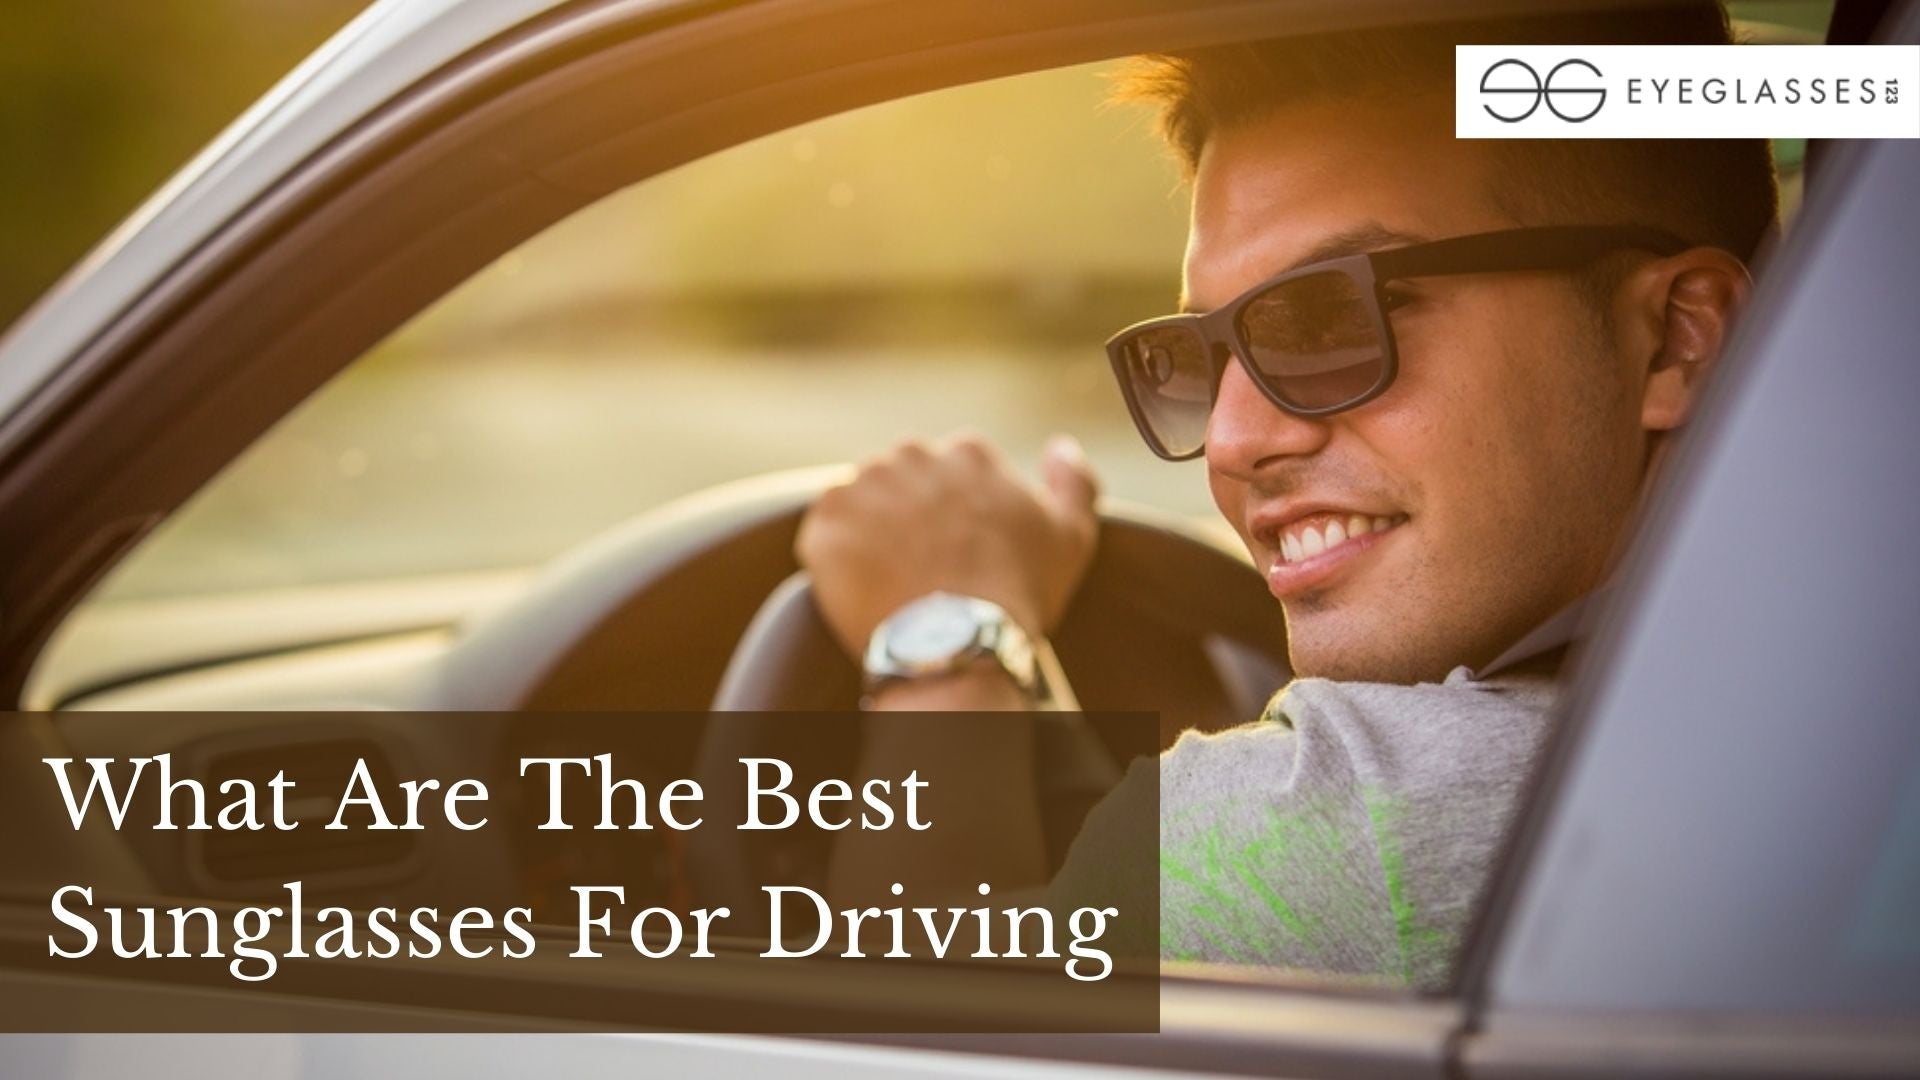 What Are The Best Sunglasses For Driving